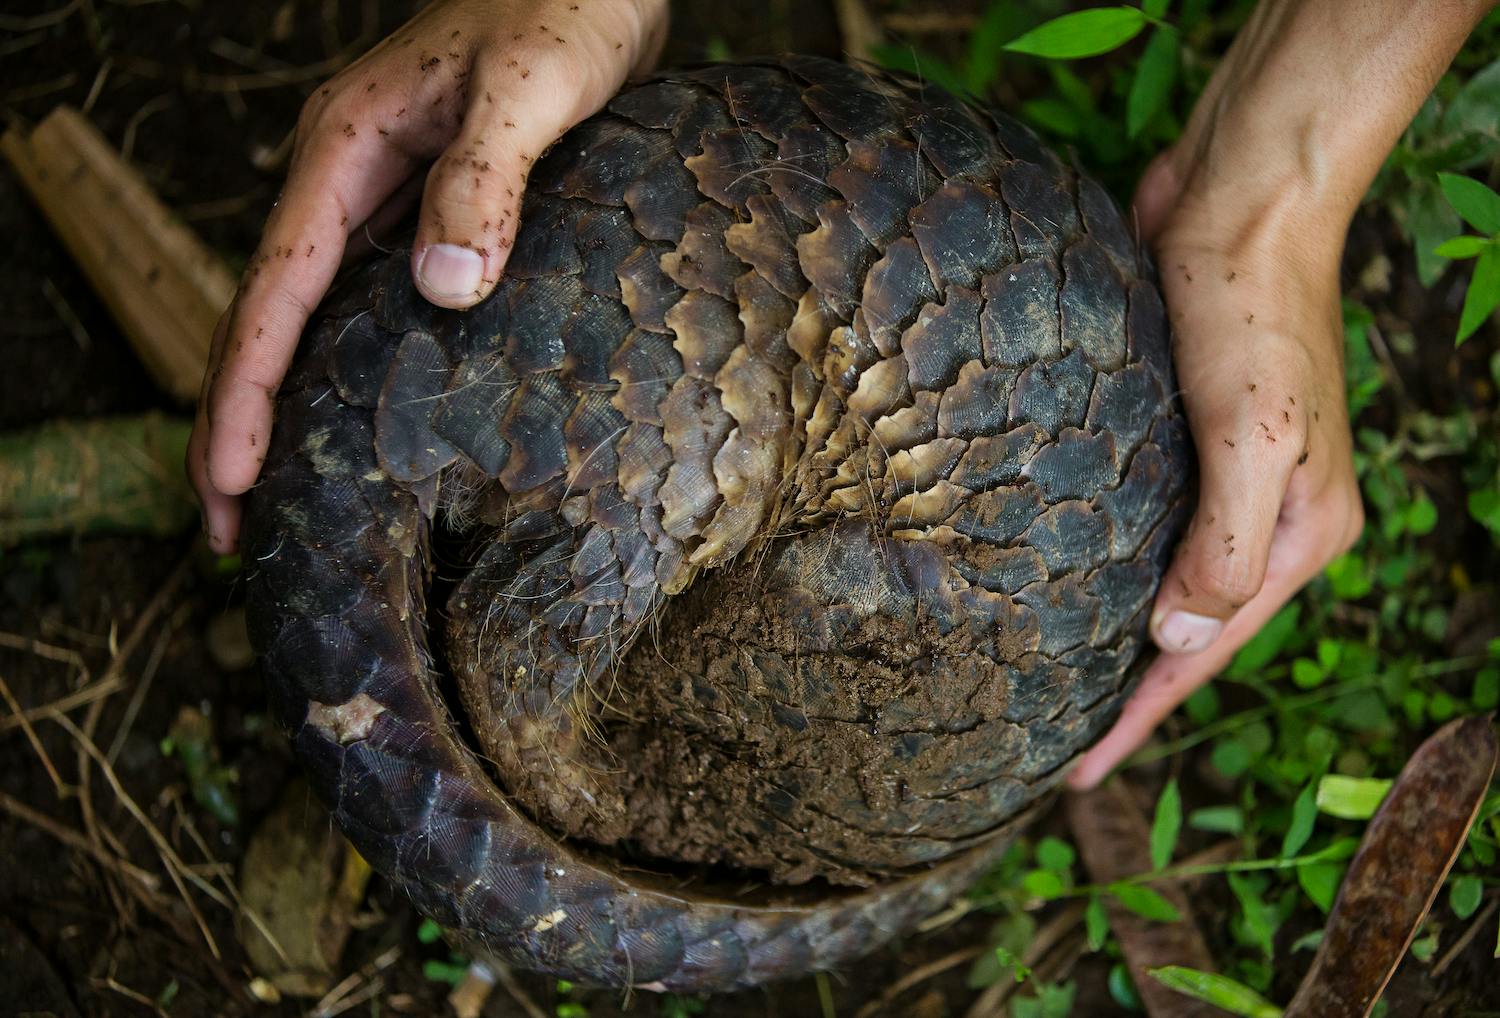 Learning about Pangolins amidst COVID-19